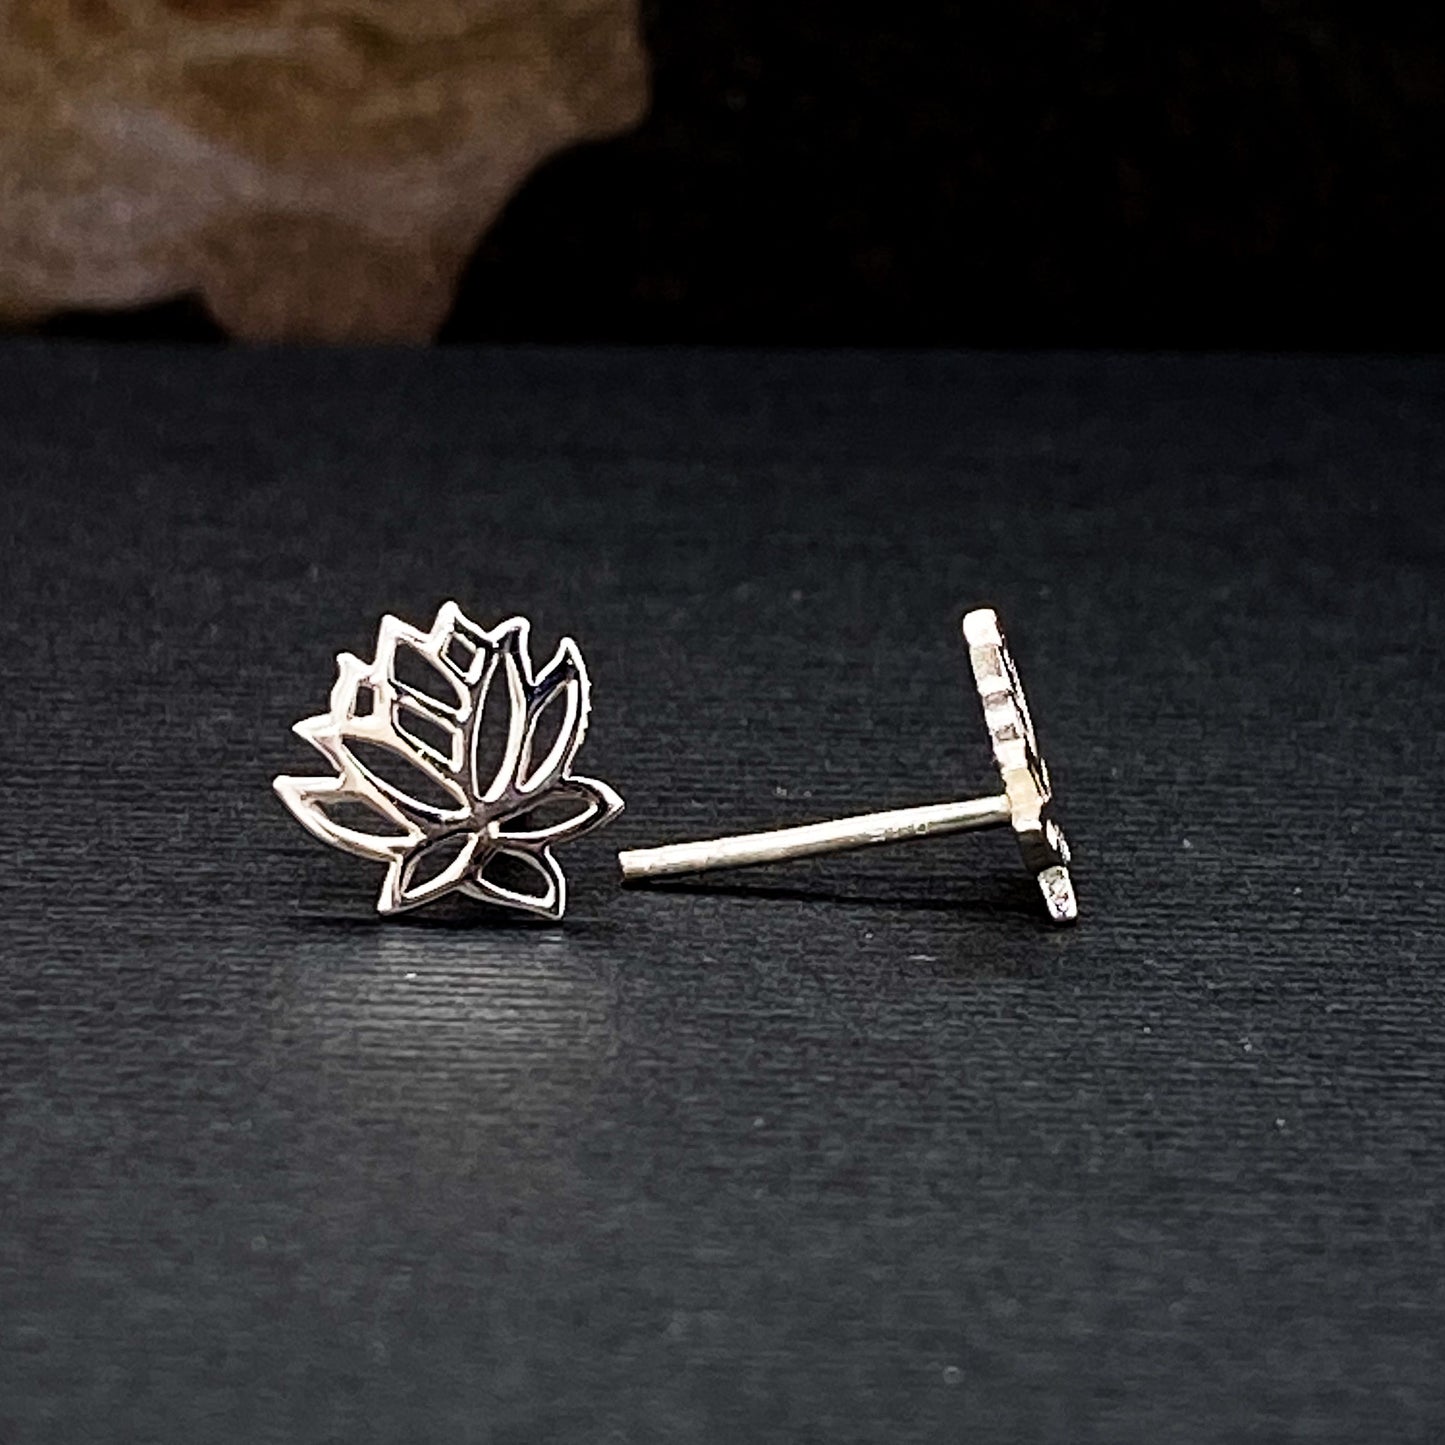 Lotus Flower Sterling Silver Earring and Charm Set